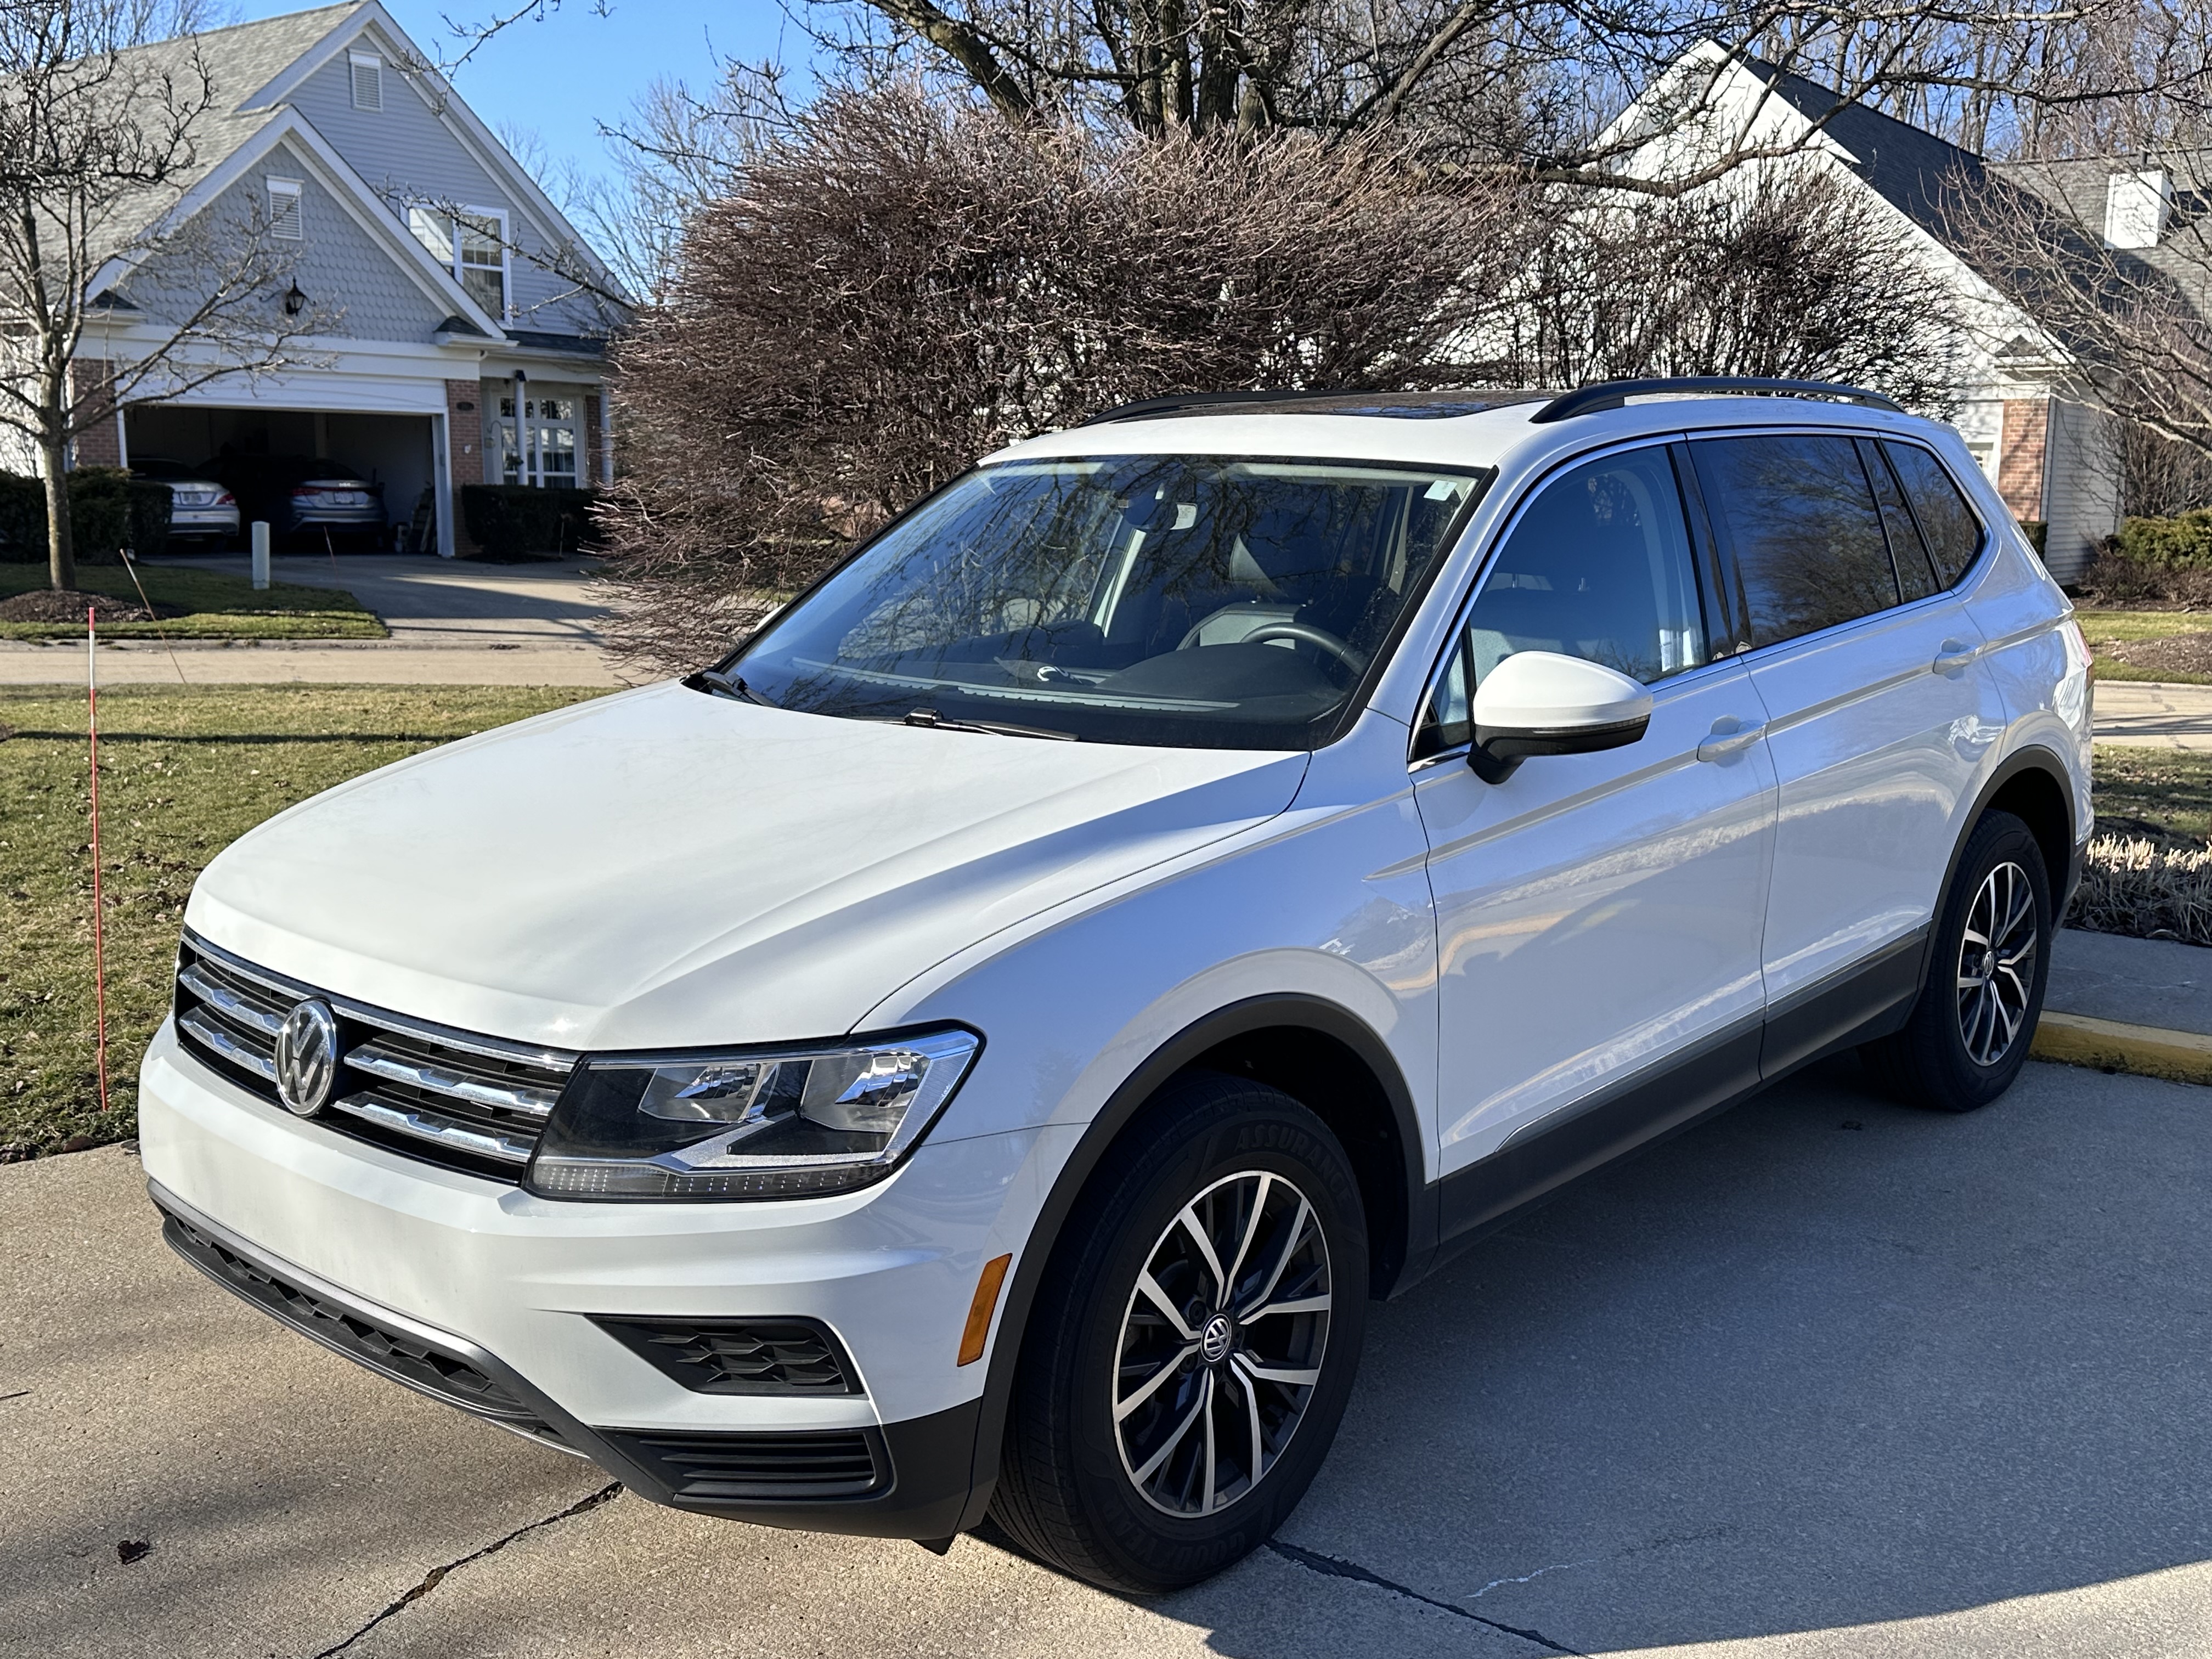 Used Volkswagen Tiguan for Sale Near Me in Mentor, OH - Autotrader